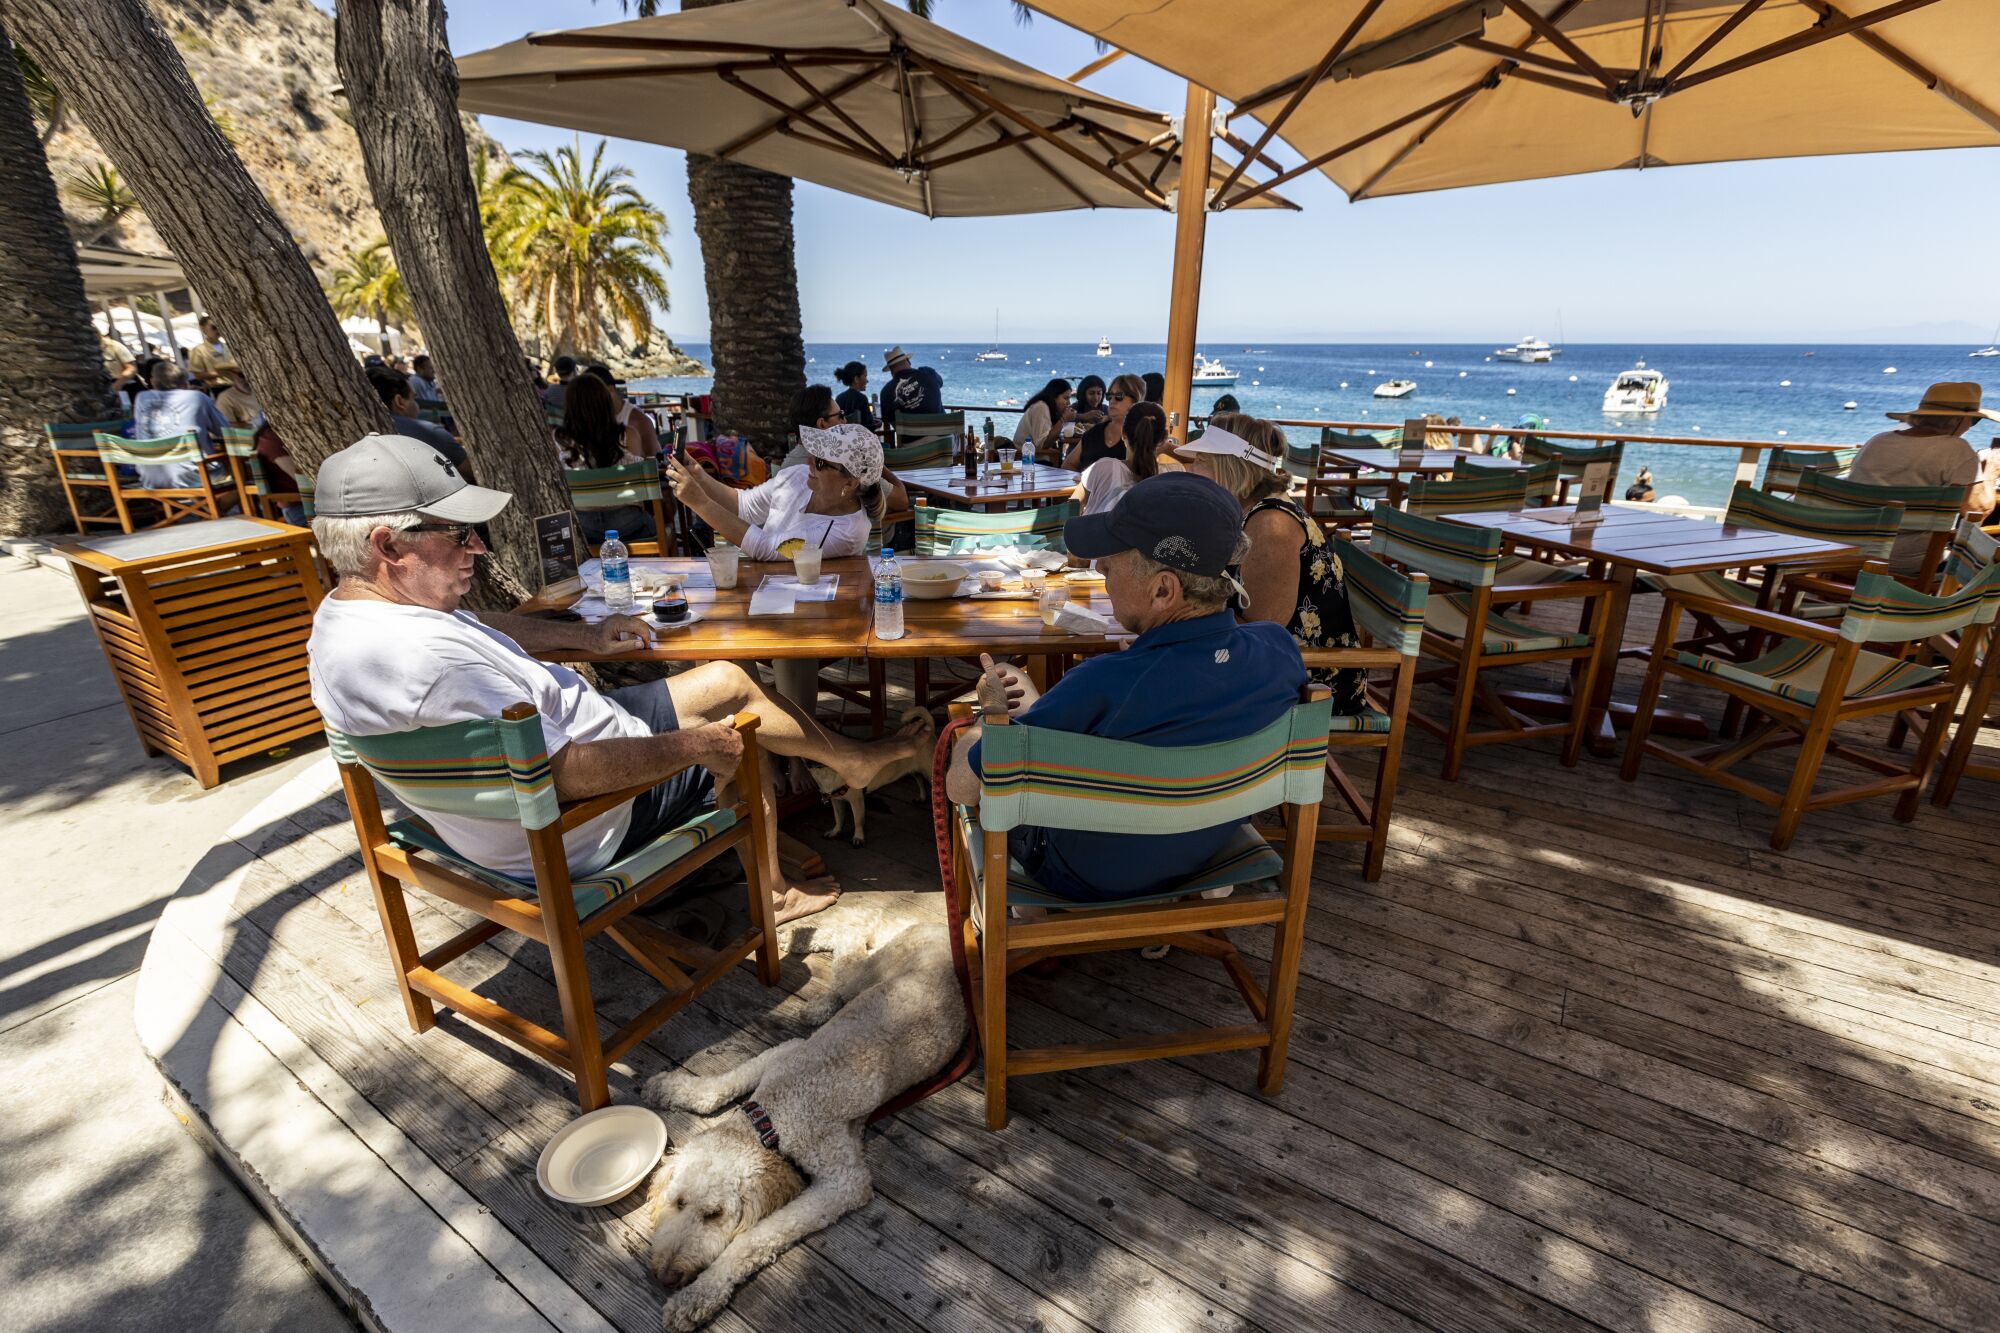 Beach-goers dine under umbrellas at outdoor tables with a view of the bay